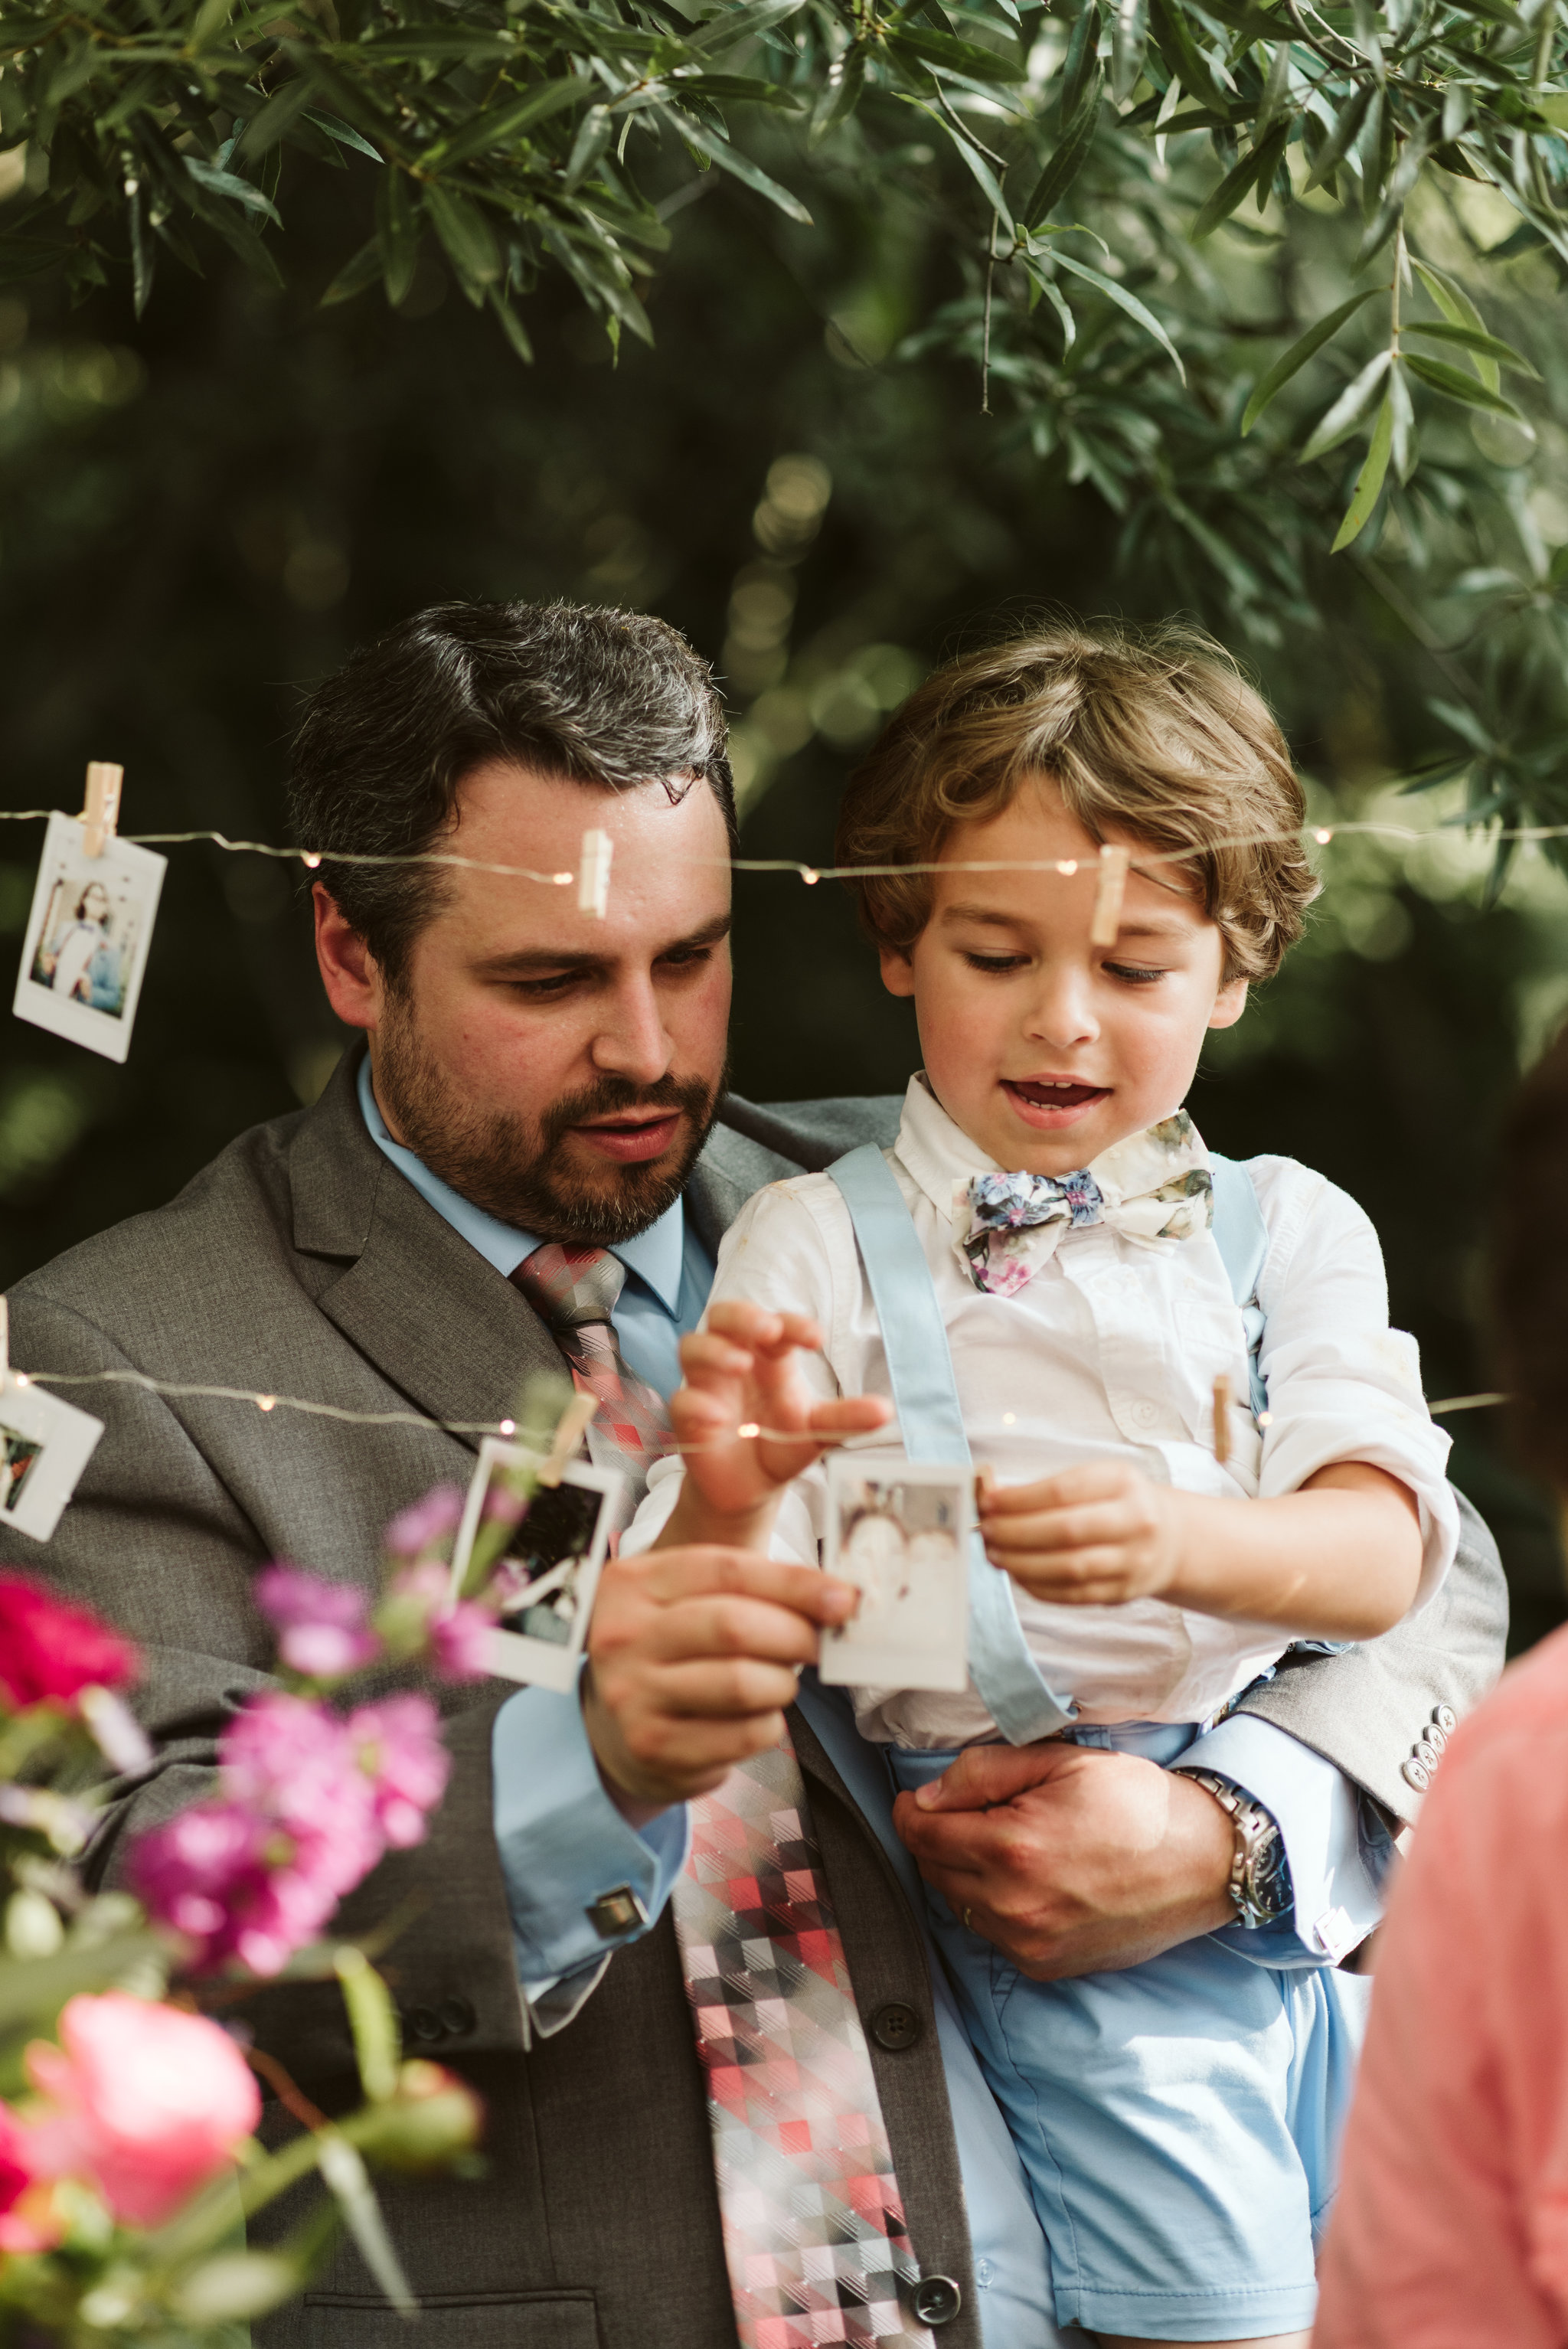  Annapolis, Quaker Wedding, Maryland Wedding Photographer, Intimate, Small Wedding, Vintage, DIY, Father and Son at Wedding Reception, Cute Photo of Family 